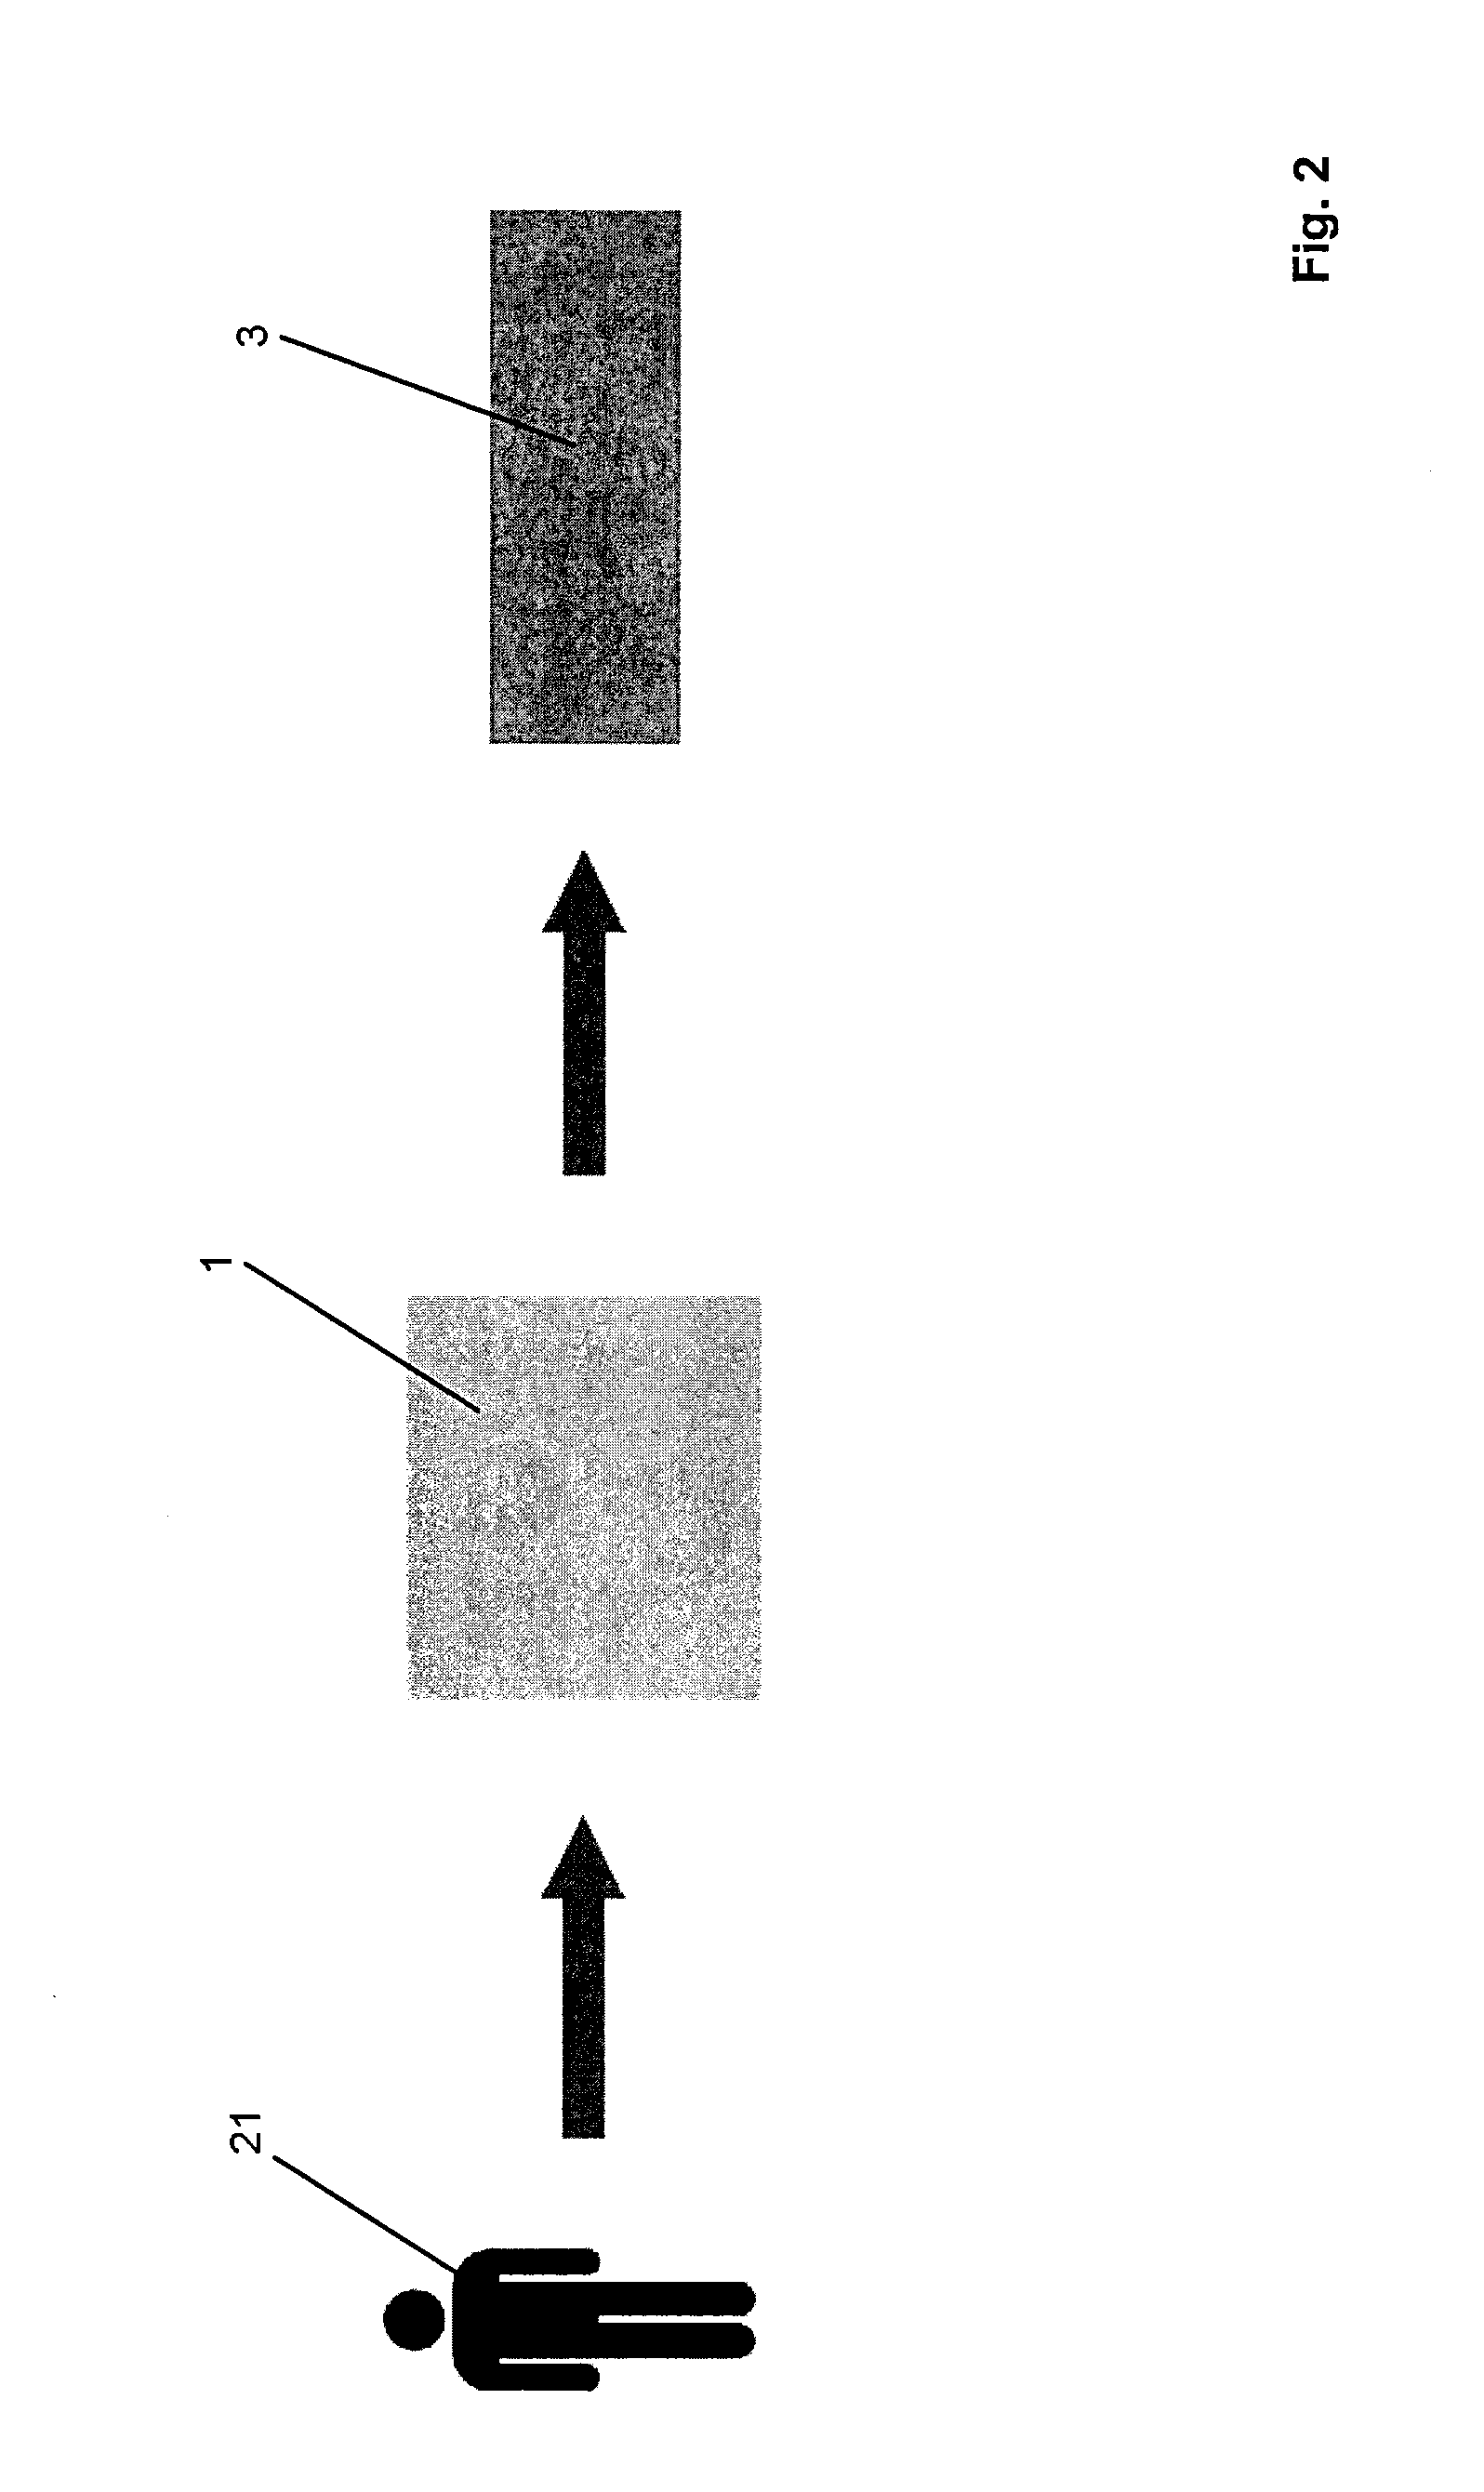 Micro-resource-pooling system and corresponding method thereof